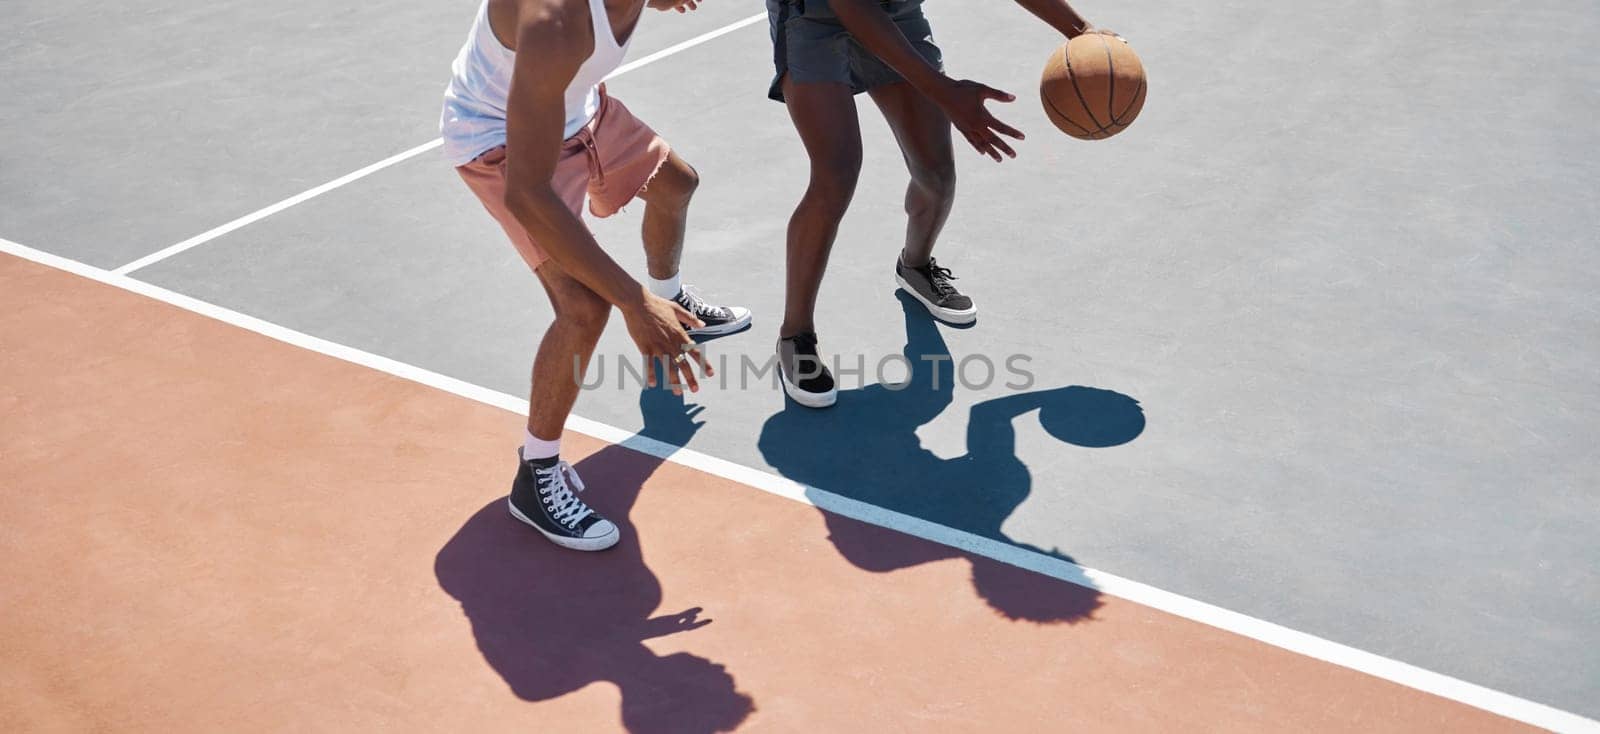 Sports, fitness and basketball training by men at basketball court for practice, exercise and stamina cardio. Sport, basketball player and friends playing competitive game outdoor, energy and workout.